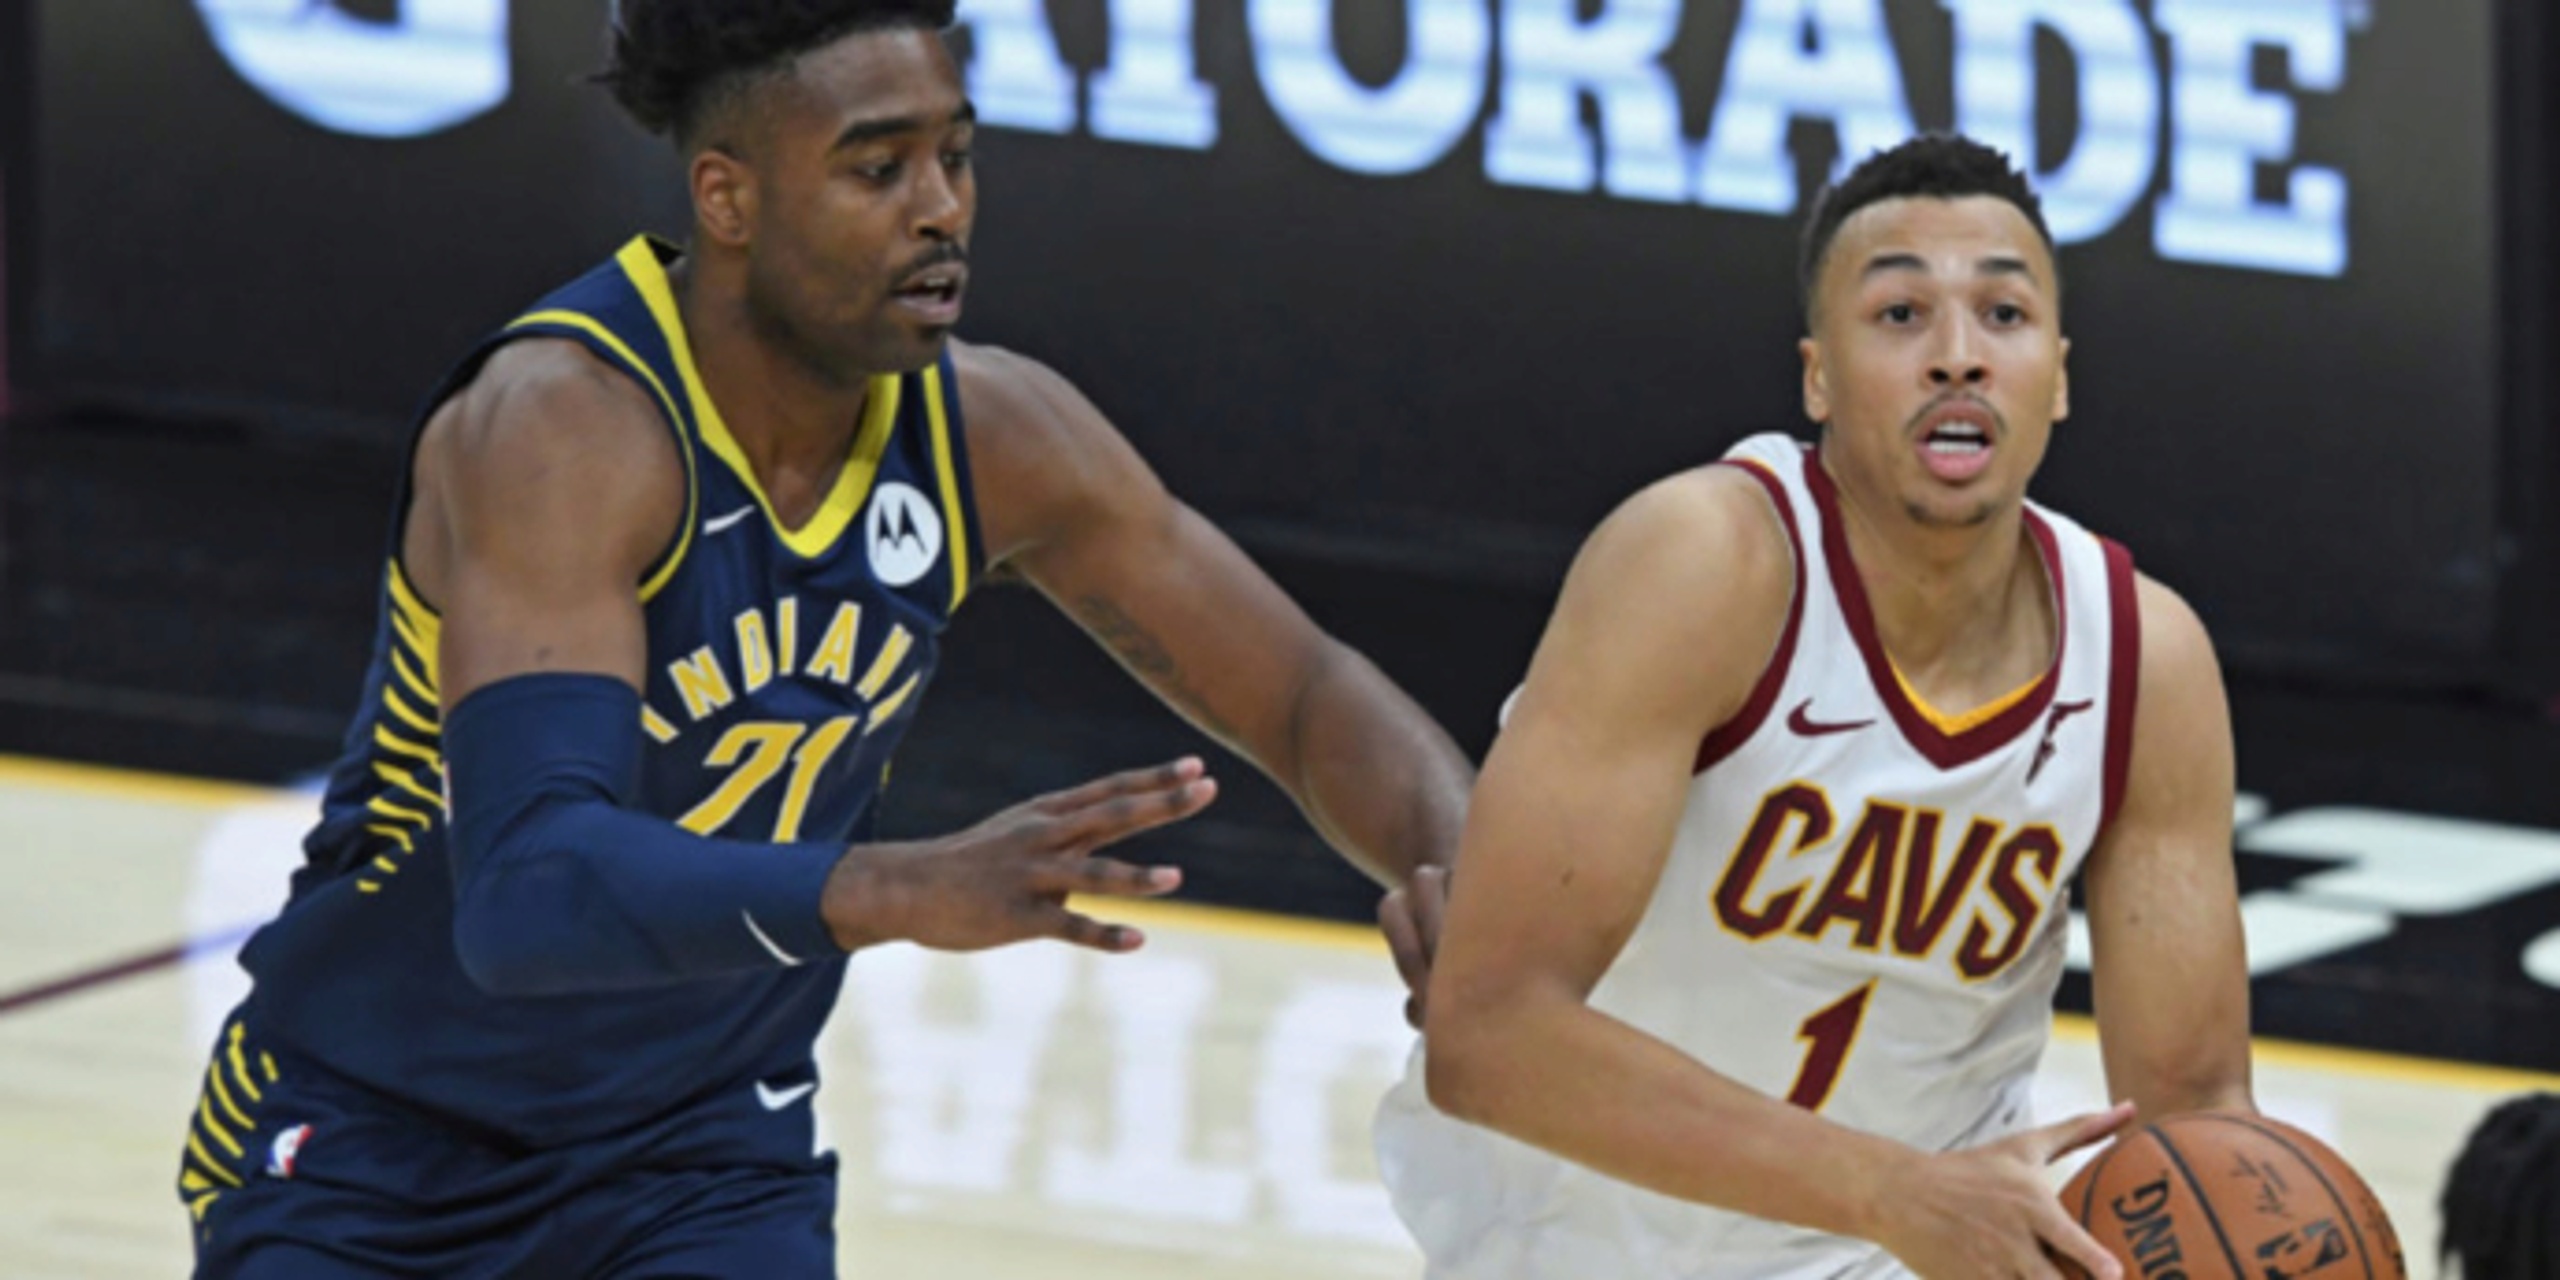 Cavs guard Dante Exum to miss 1-2 months with strained calf